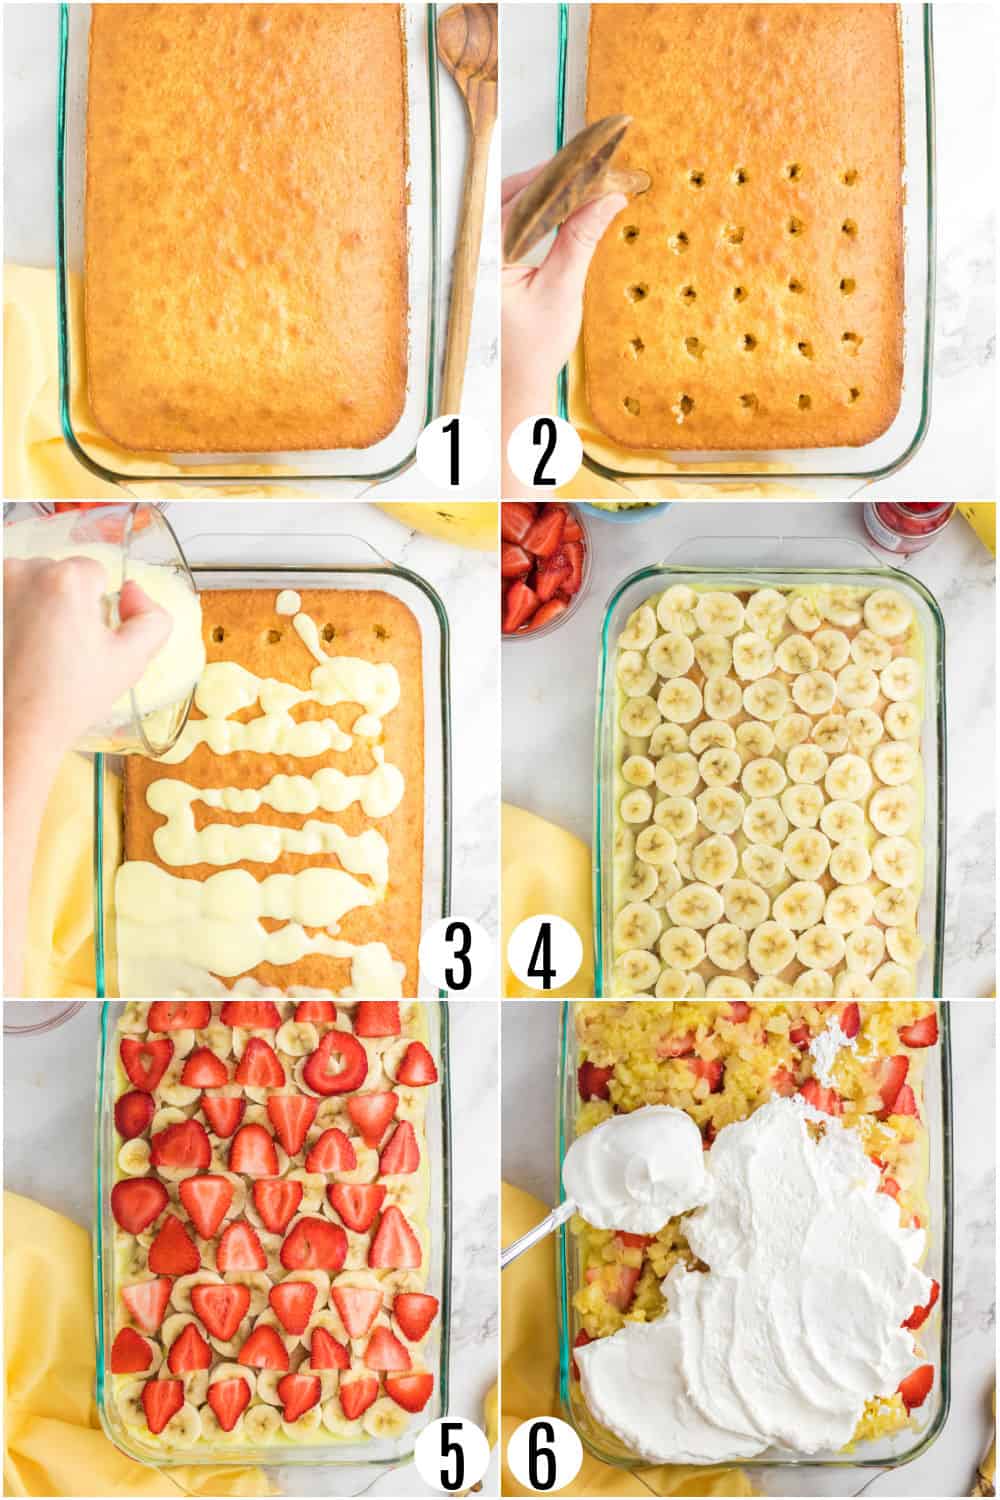 Step by step photos showing how to make banana split cake.